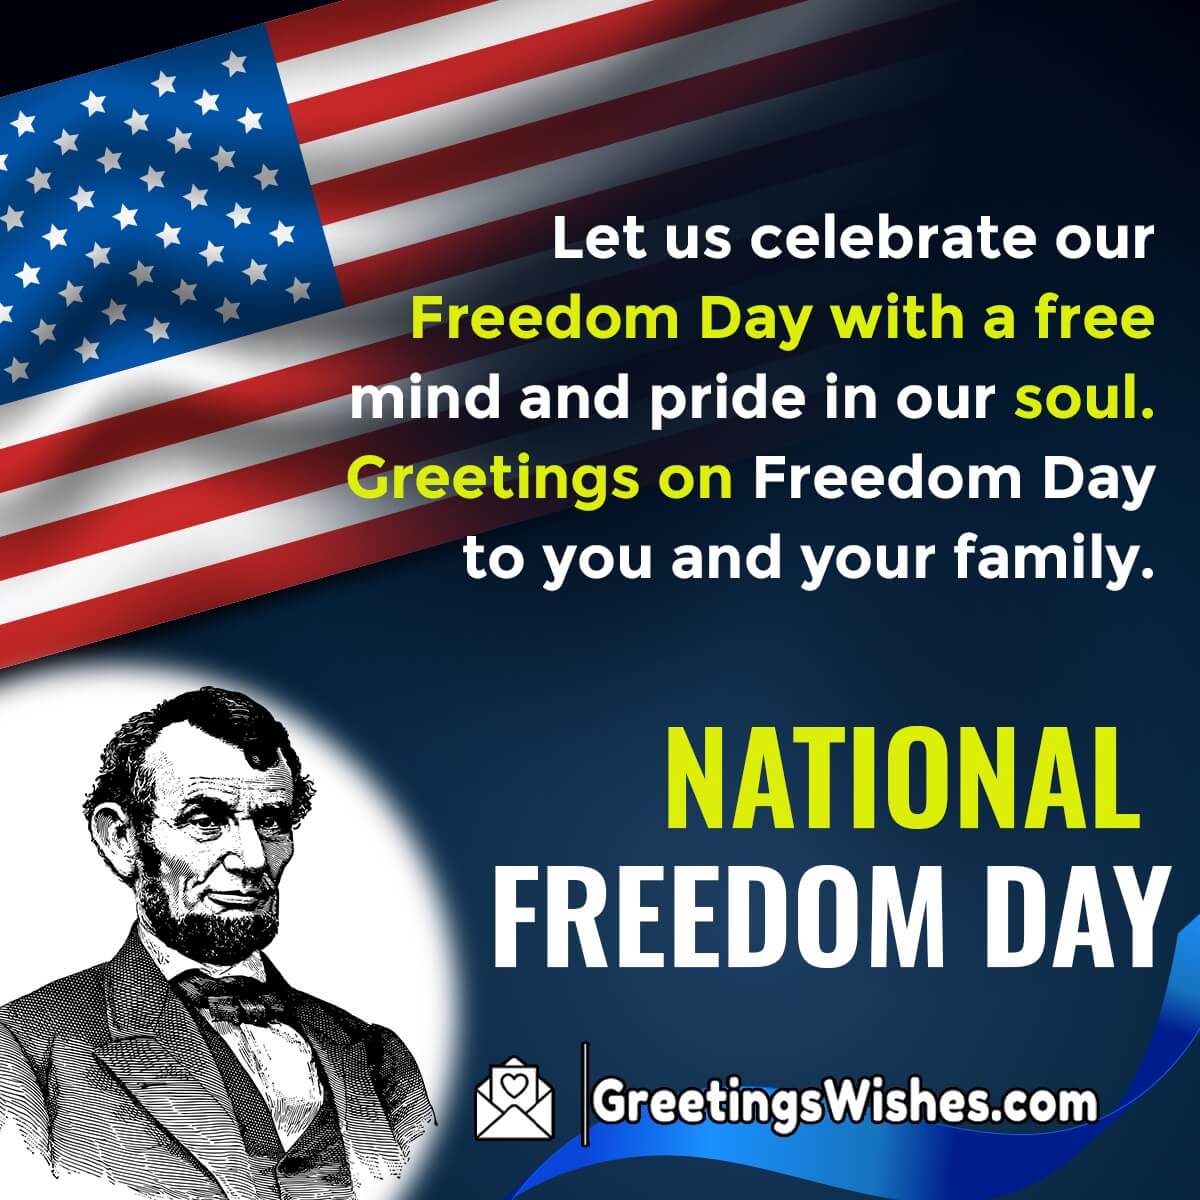 National Freedom Day Greetings